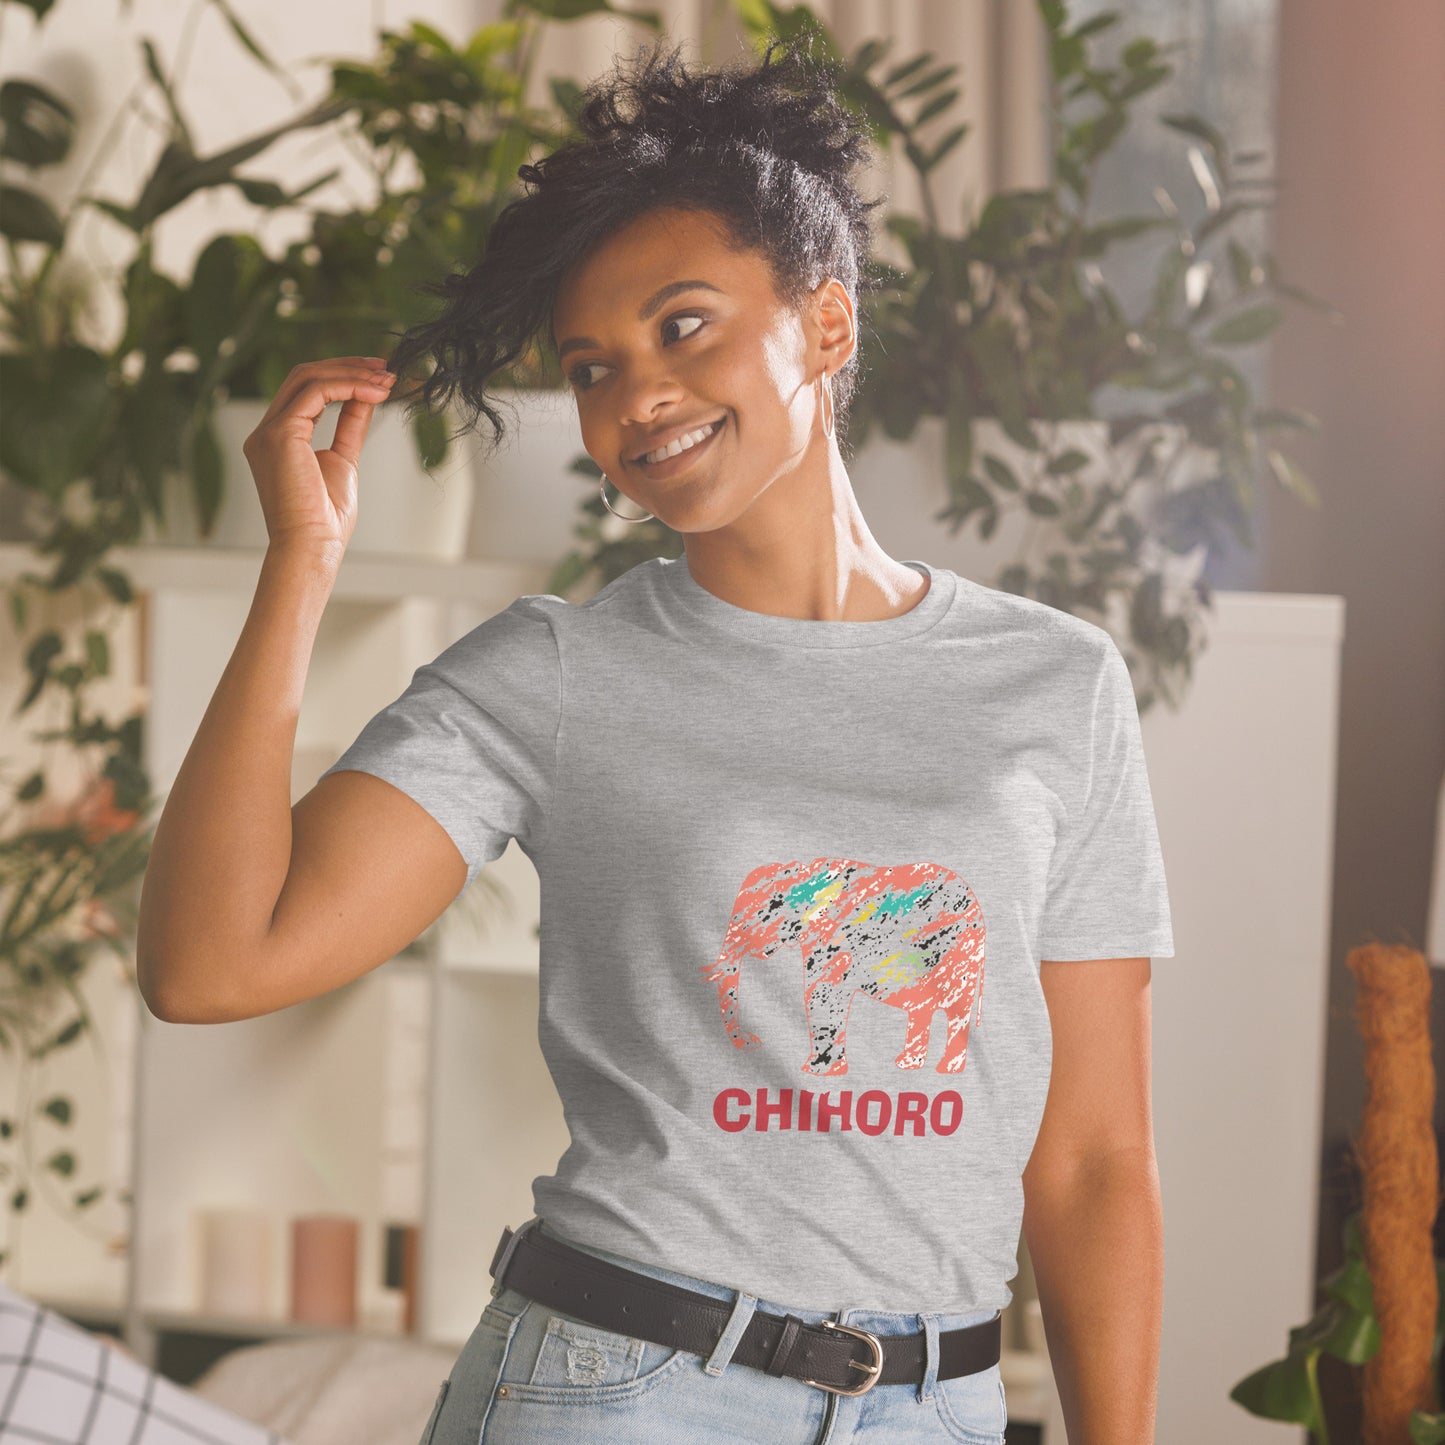 Chihoro Elephant Totem Tee for Women